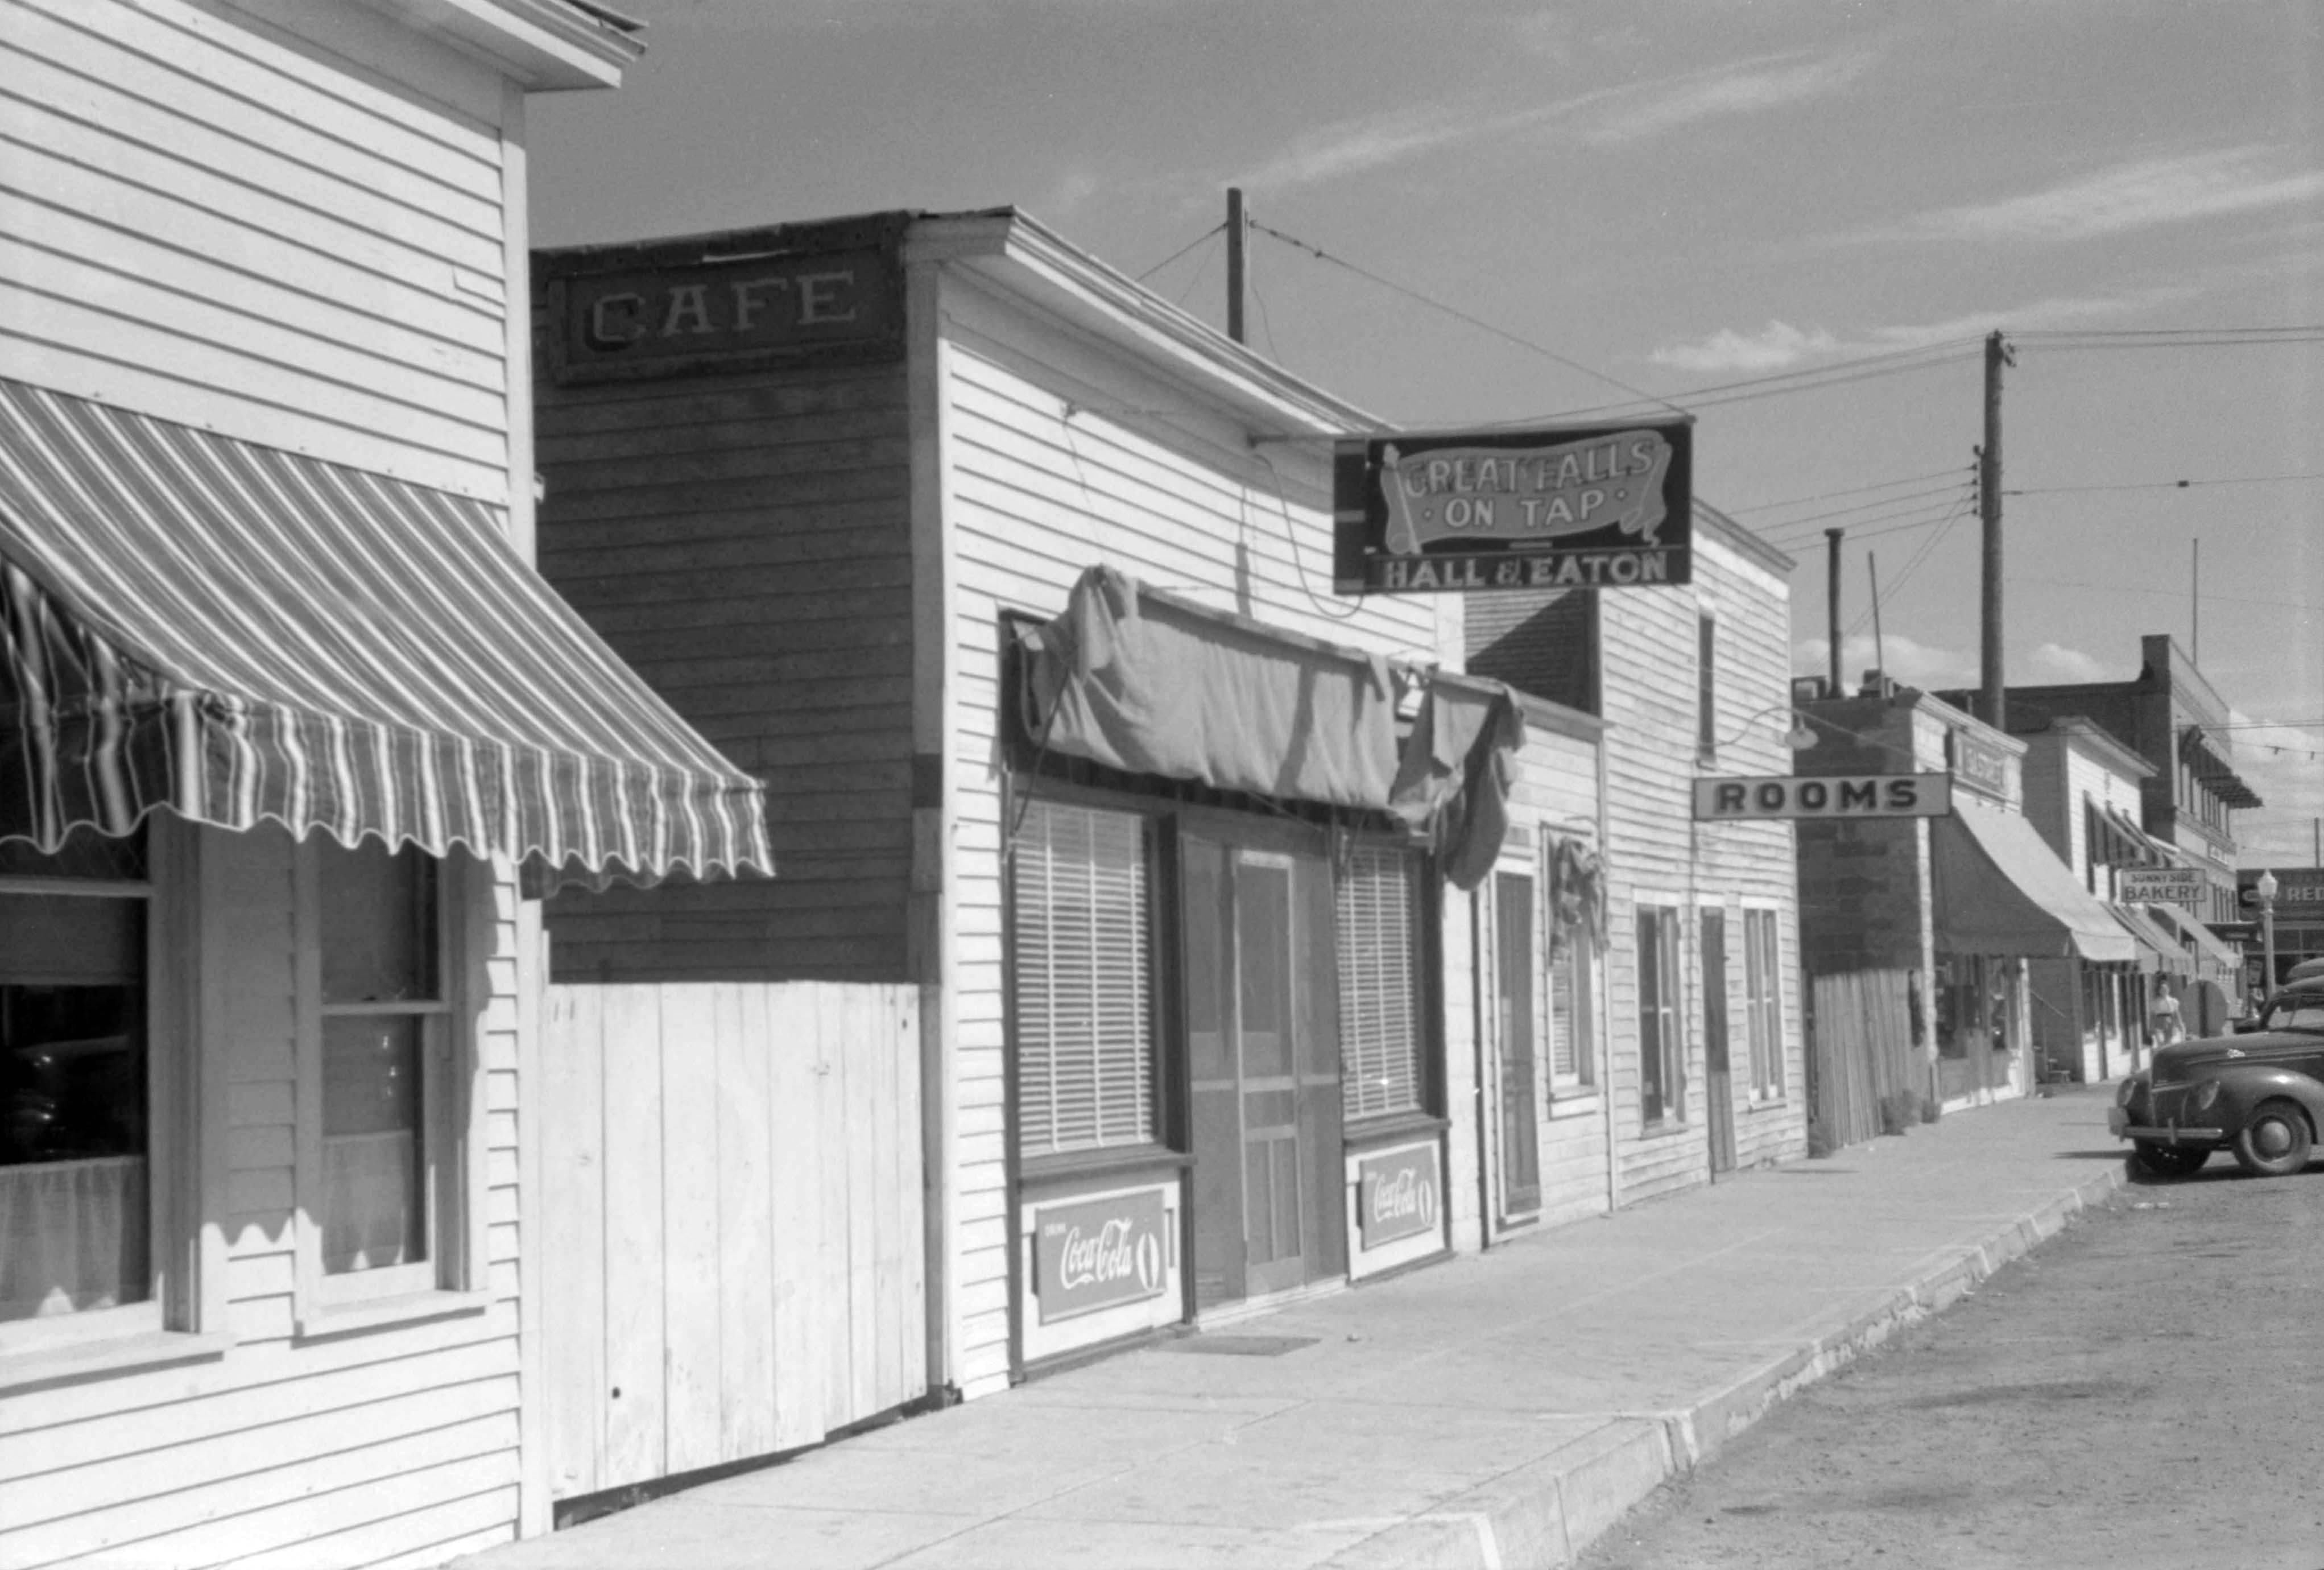 Street in Wolf Point, 1941 in Montana image - Free stock photo - Public Domain photo - CC0 Images